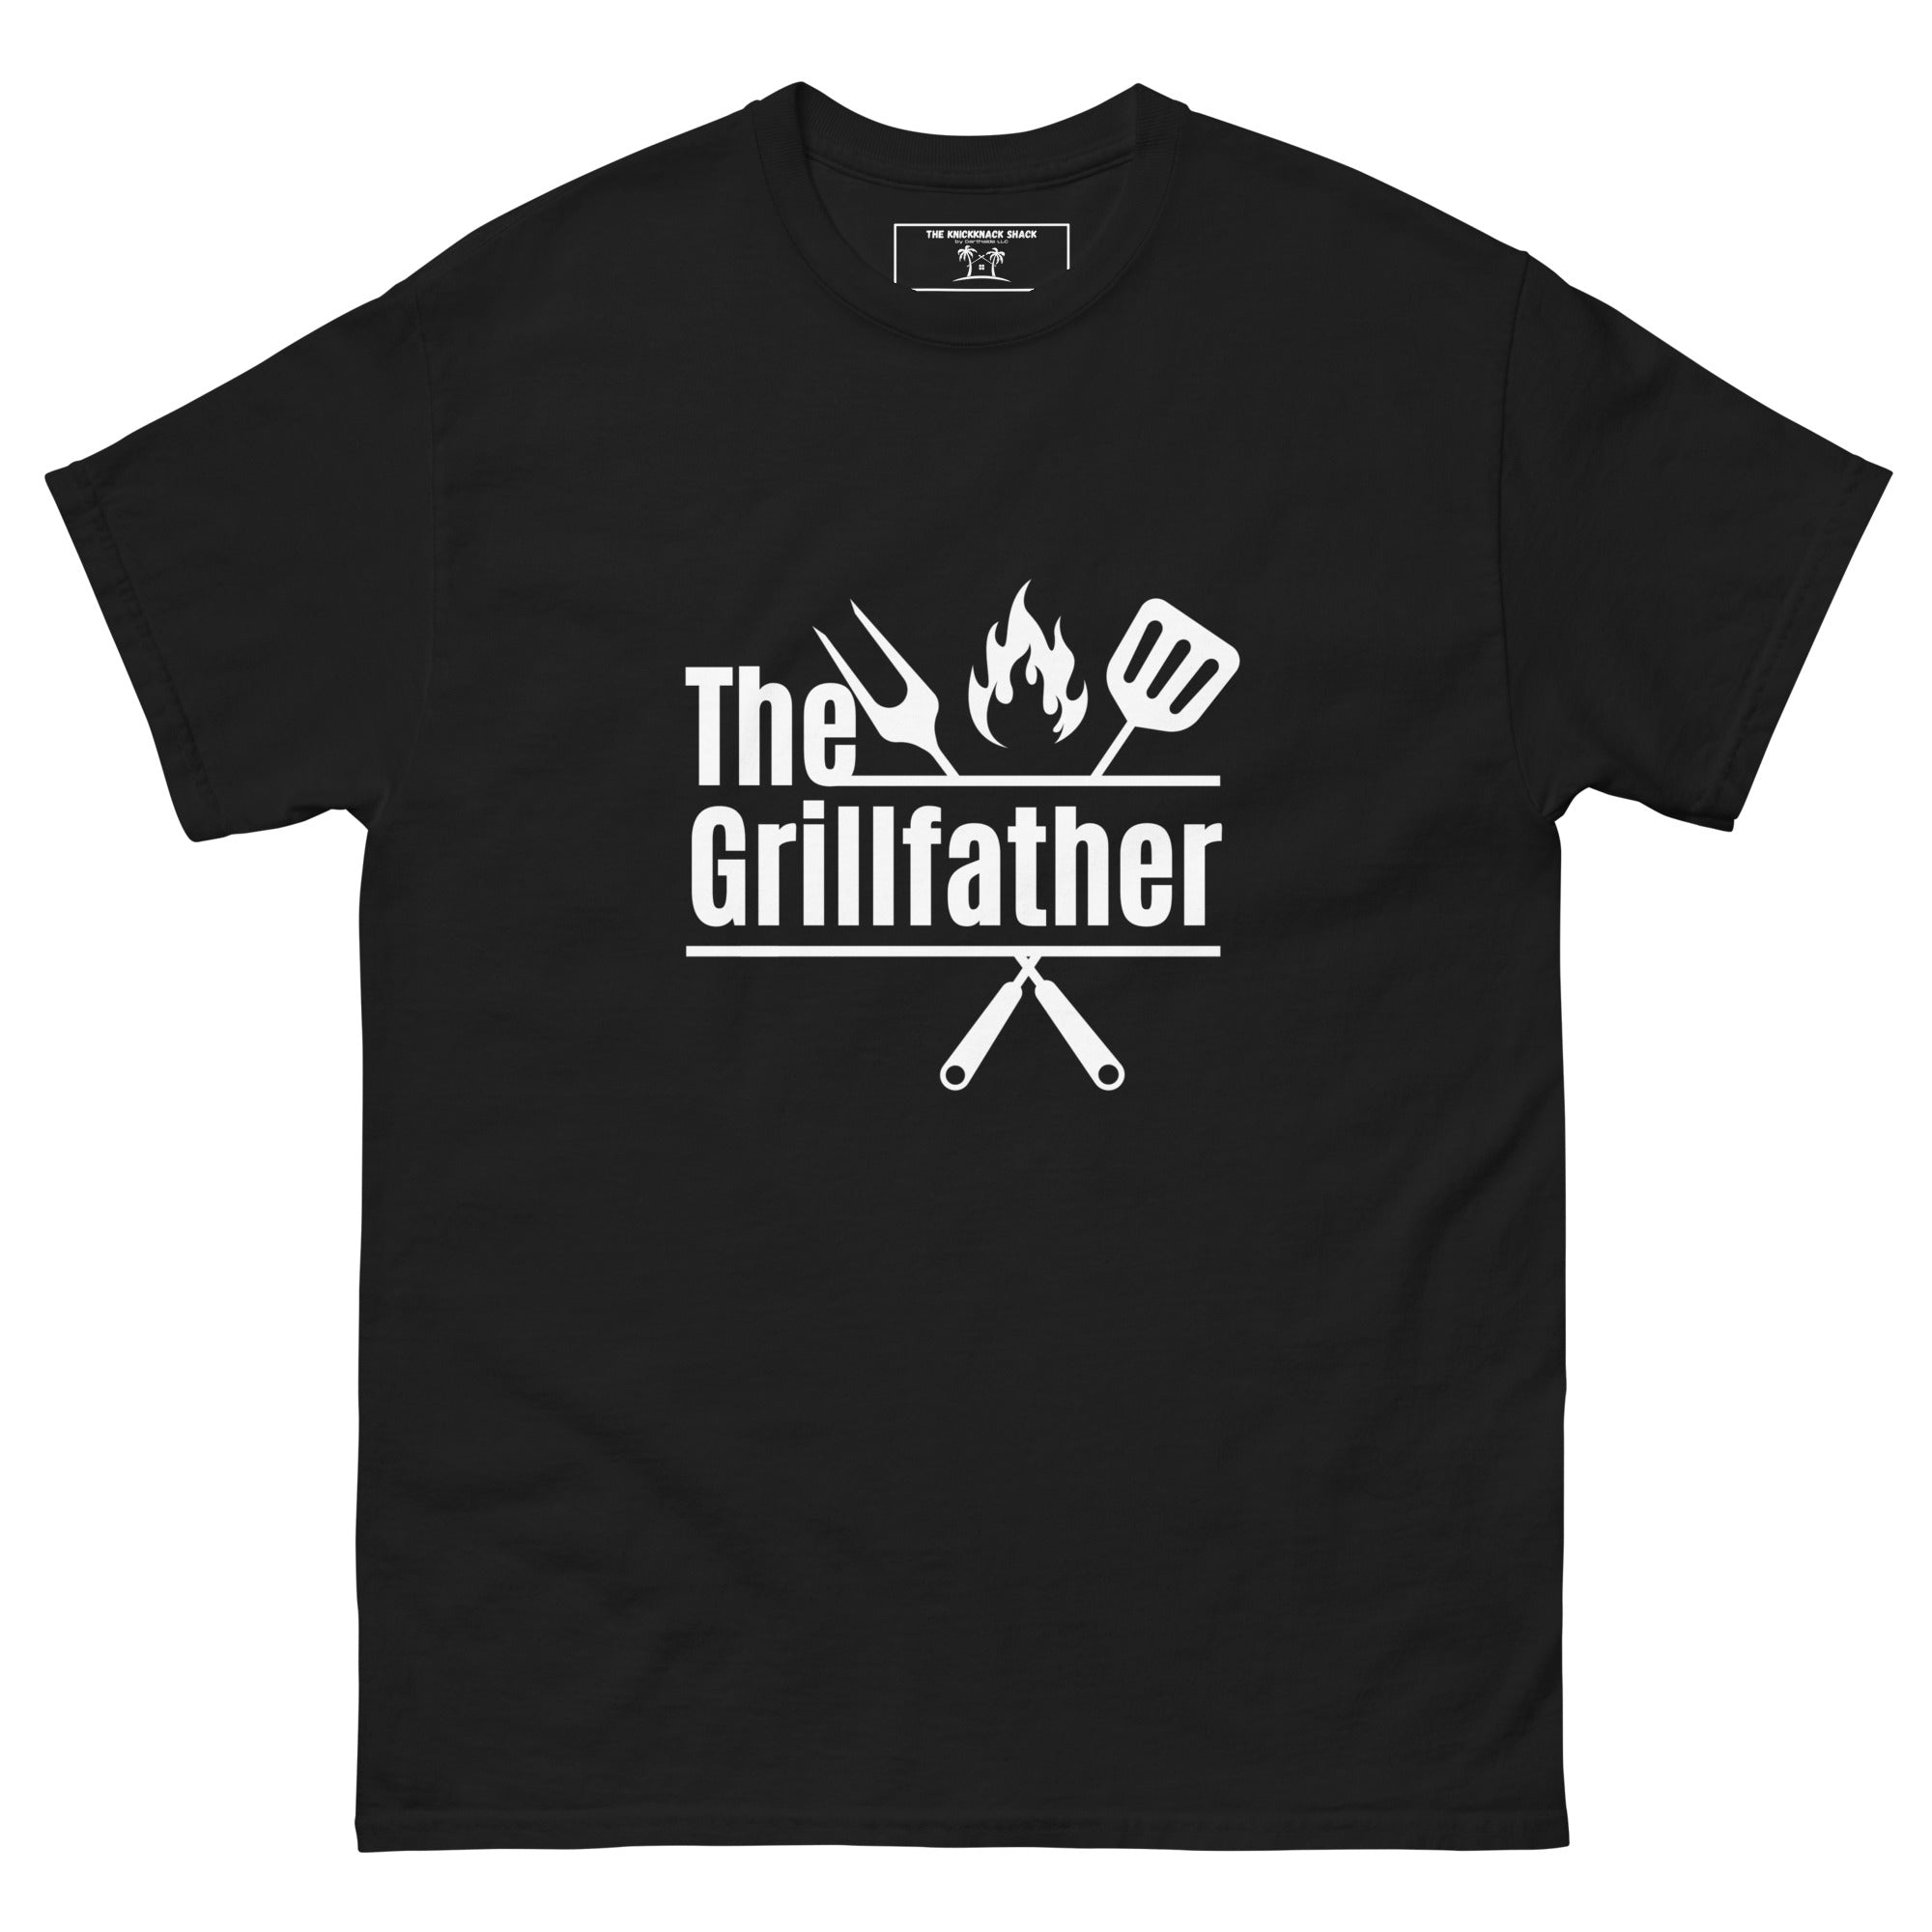 Tee-shirt classique - The Grillfather (couleurs sombres)